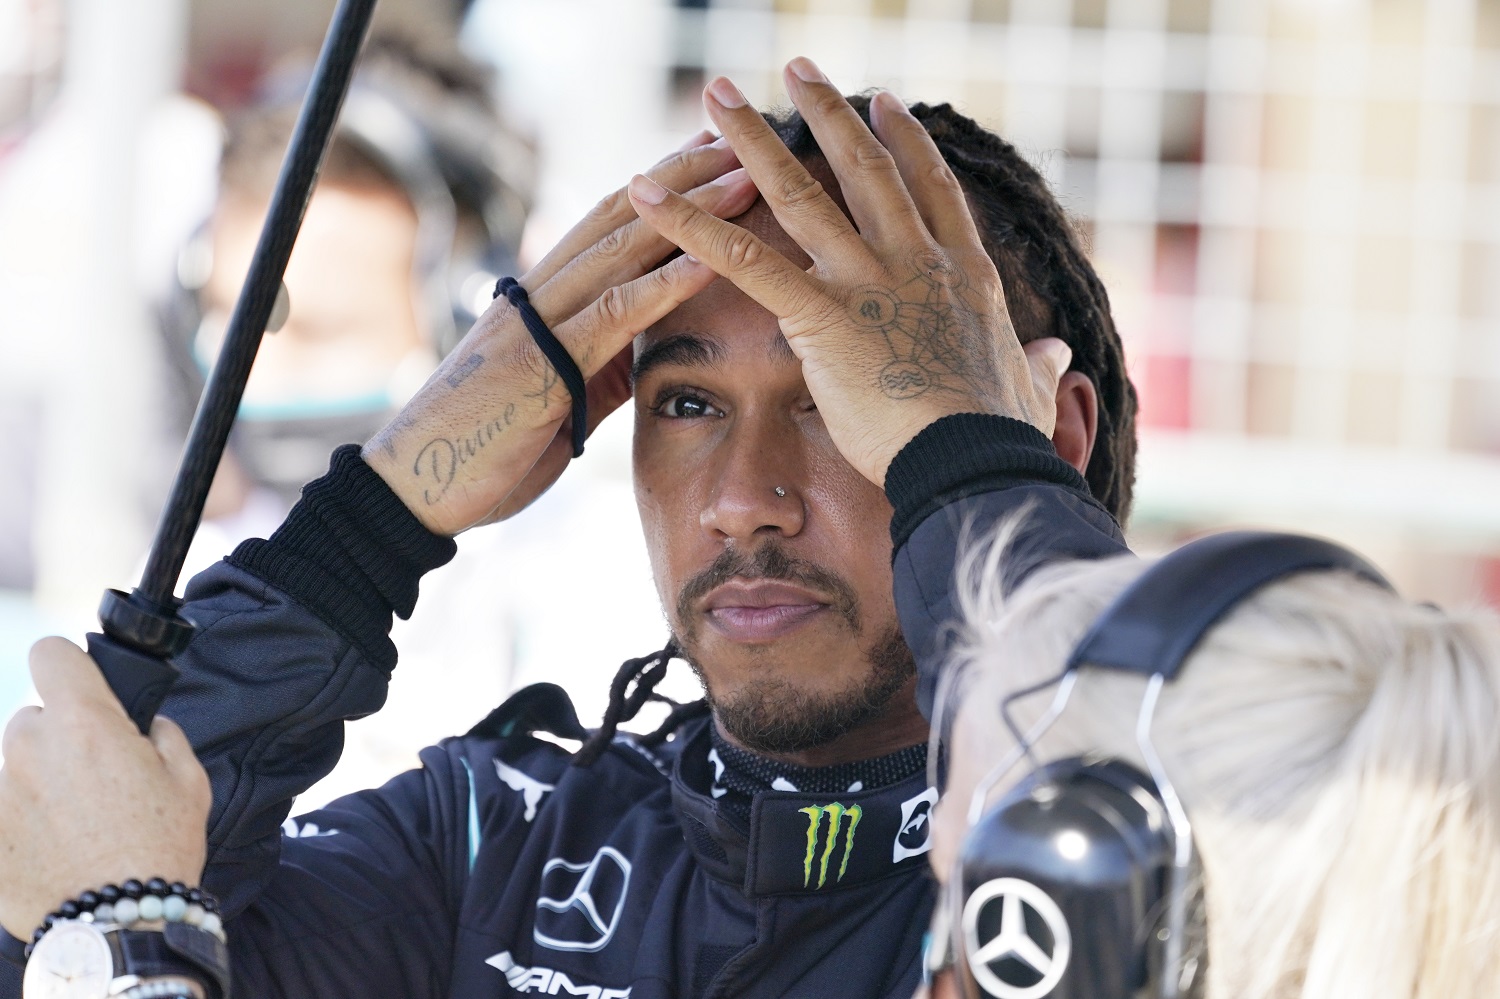 Lewis Hamilton of Great Britain prepares to drive on the grid during the Formula 1 U.S. Grand Prix at Circuit of The Americas on Oct. 24, 2021, in Austin, Texas.